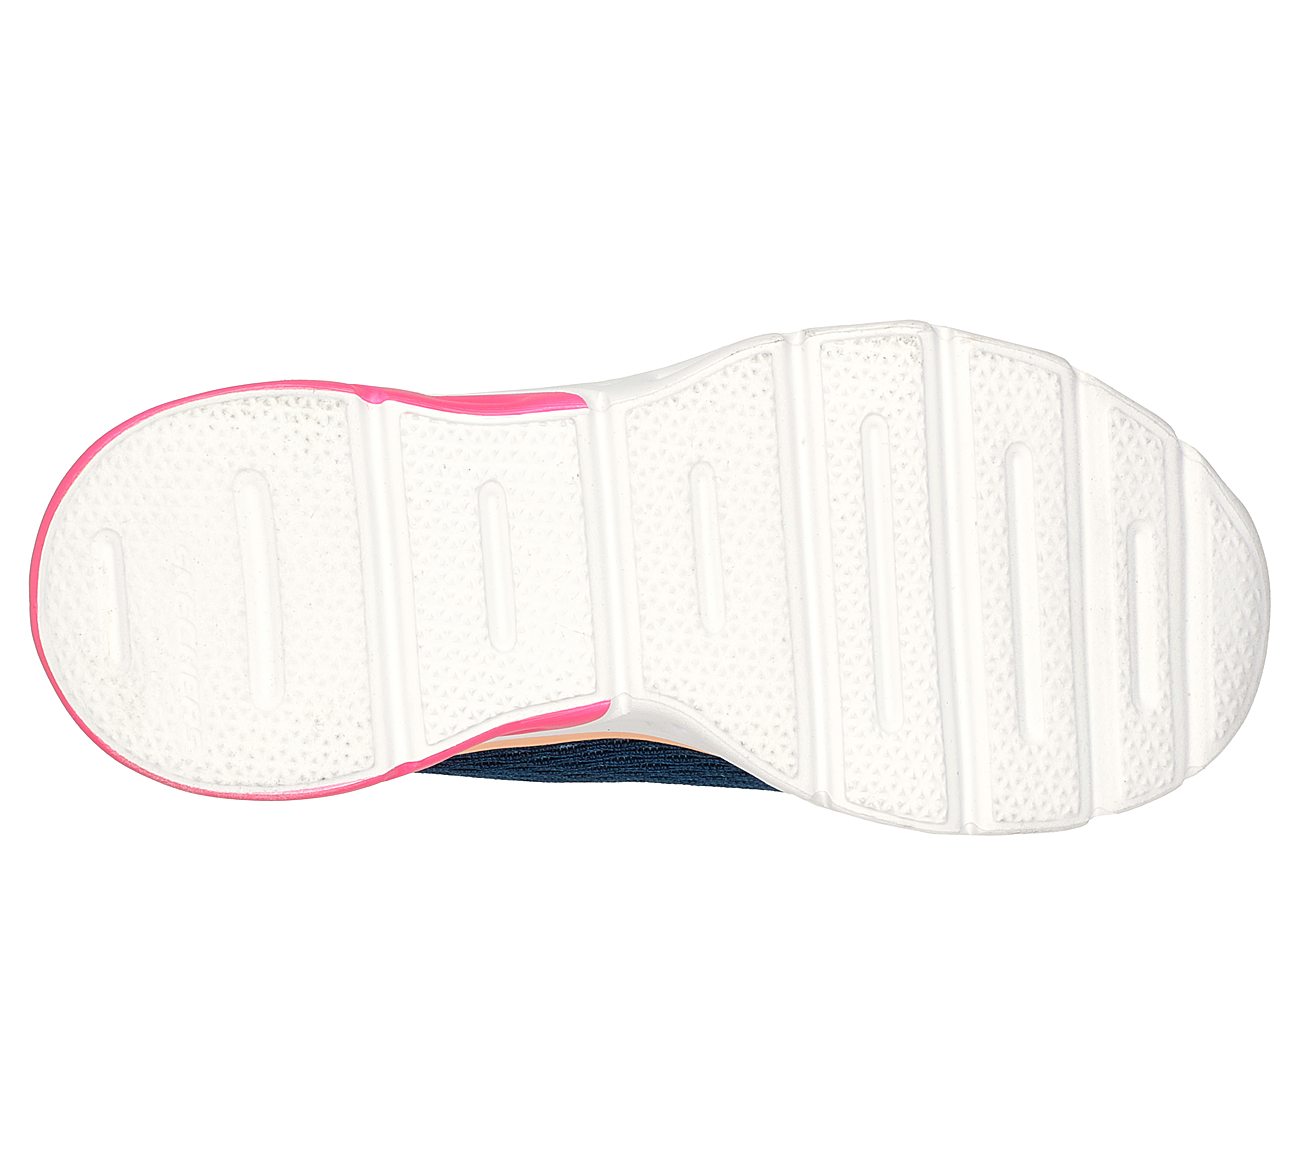 GLIDE-STEP SPORT - WAVE HEAT, Navy image number null